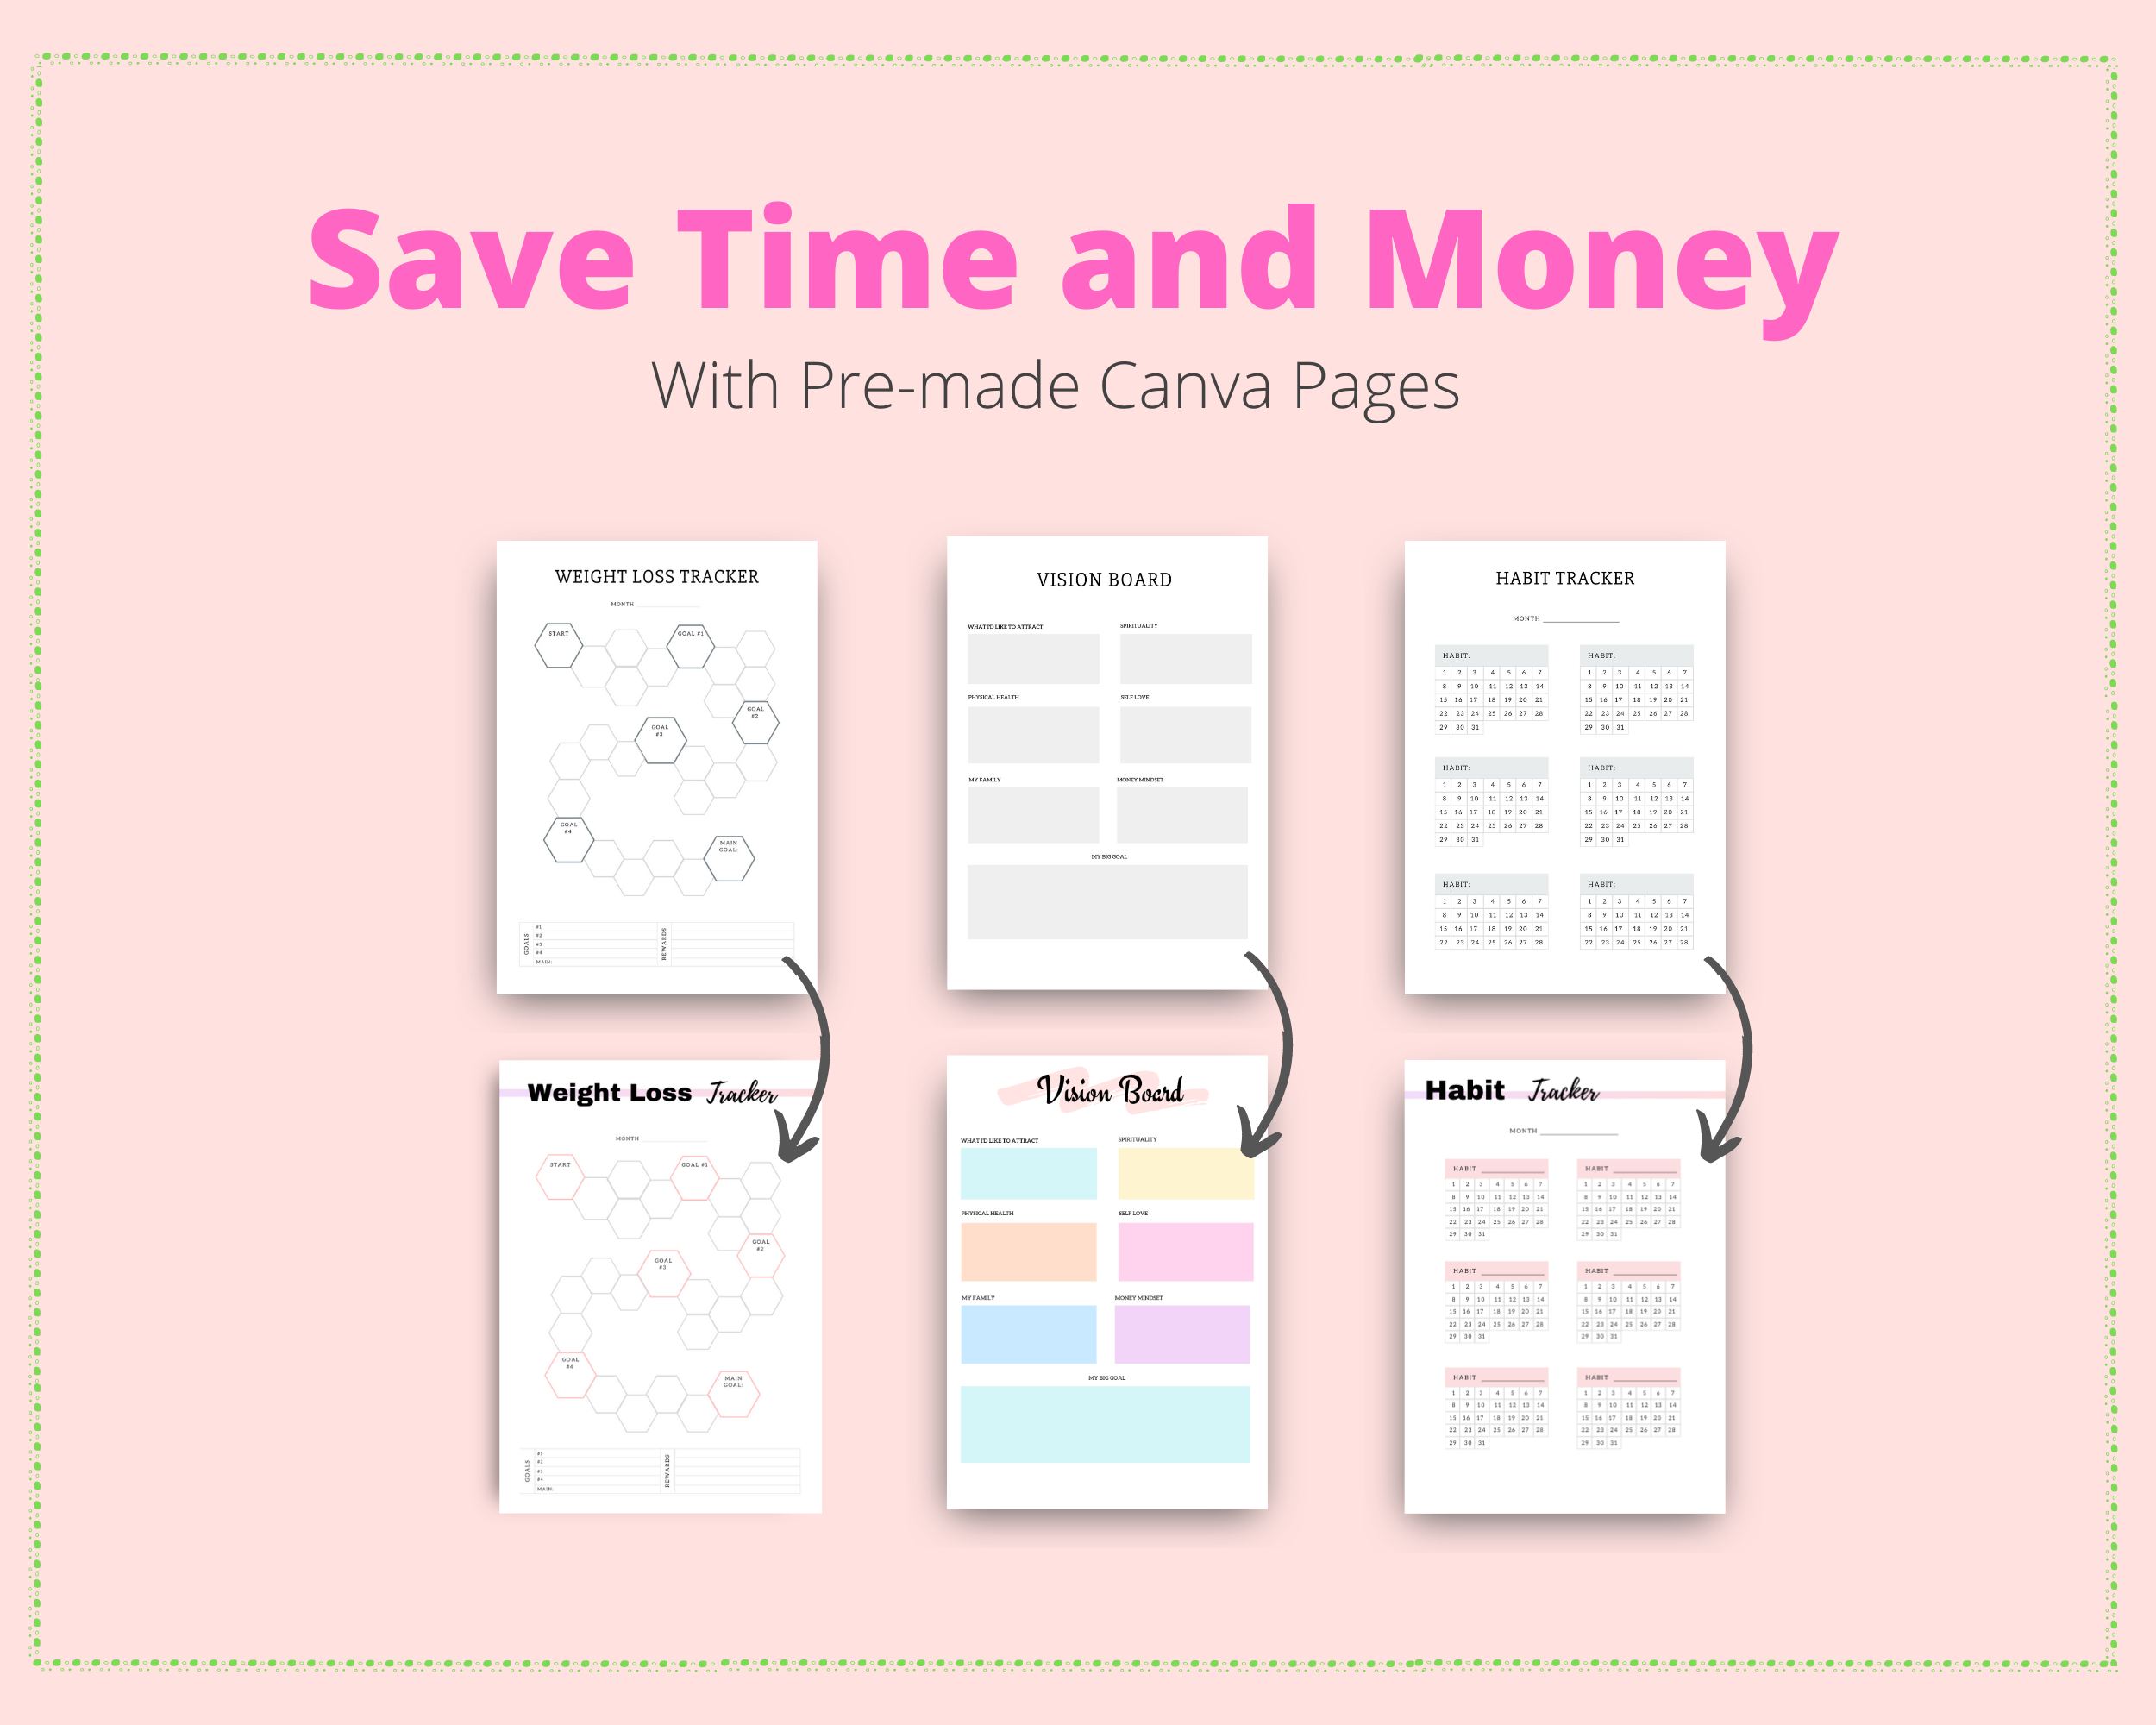 Editable Life Planner in Canva | Commercial Use